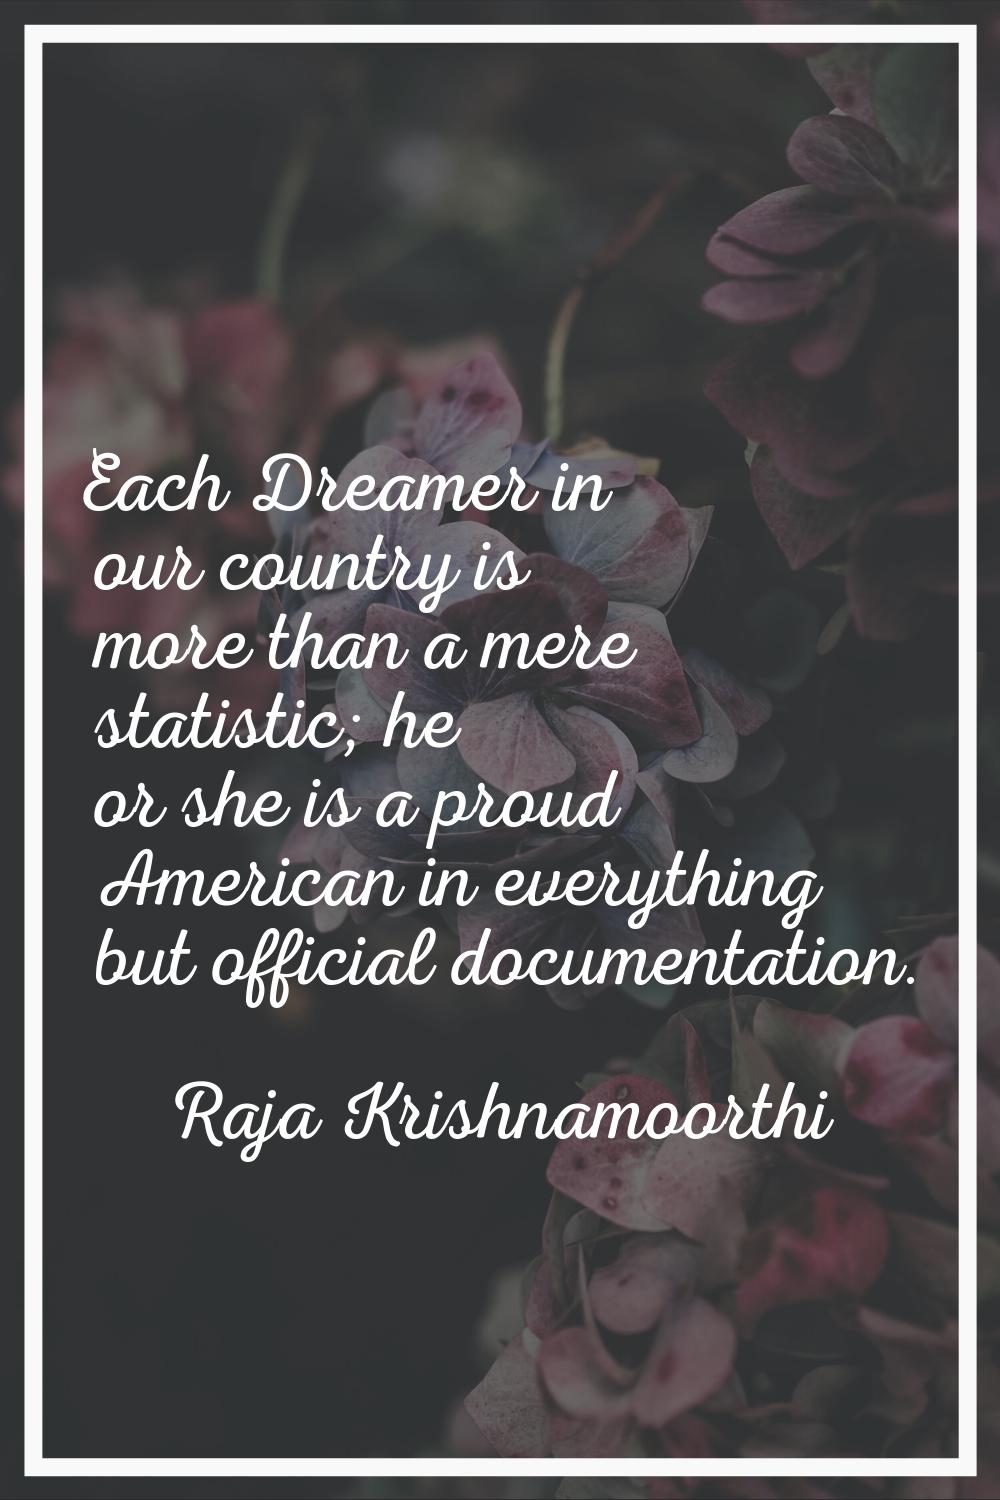 Each Dreamer in our country is more than a mere statistic; he or she is a proud American in everyth